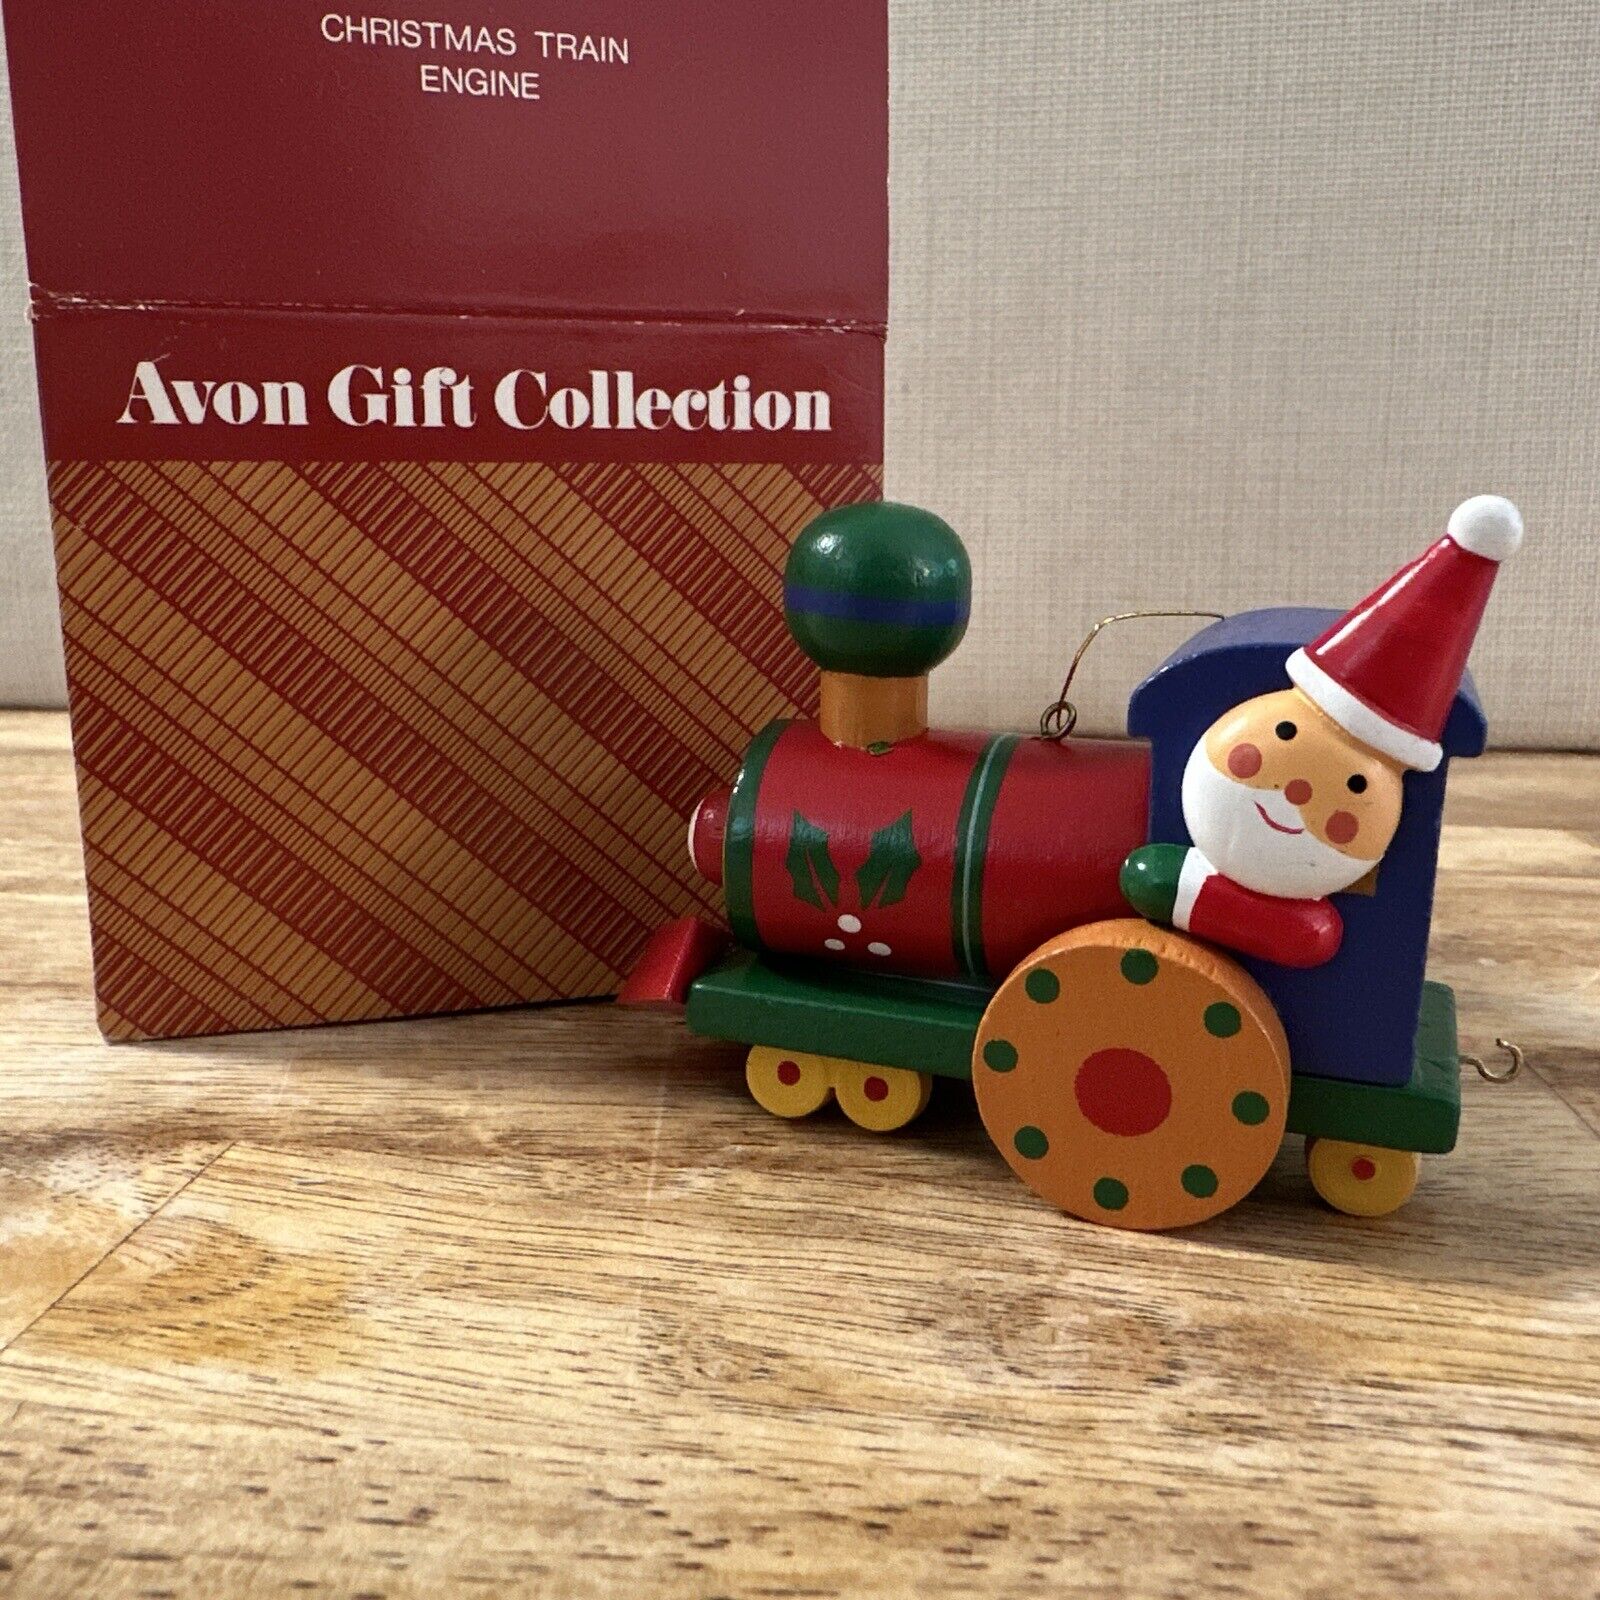 NEW Avon Gift Collection Christmas Train- Engine VINTAGE